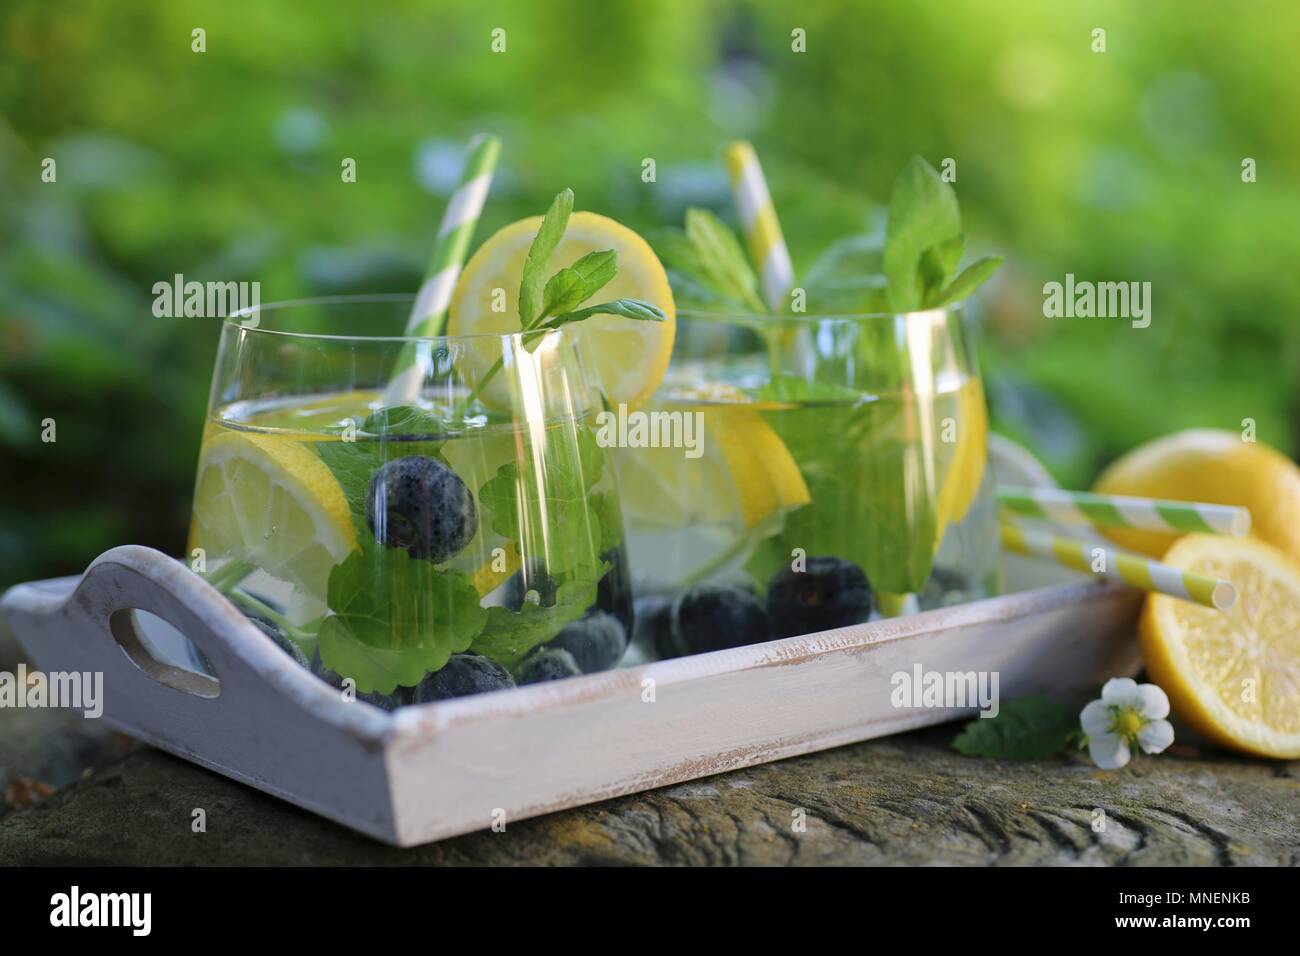 Water with lemon, blueberries and mint served in a garden Stock Photo